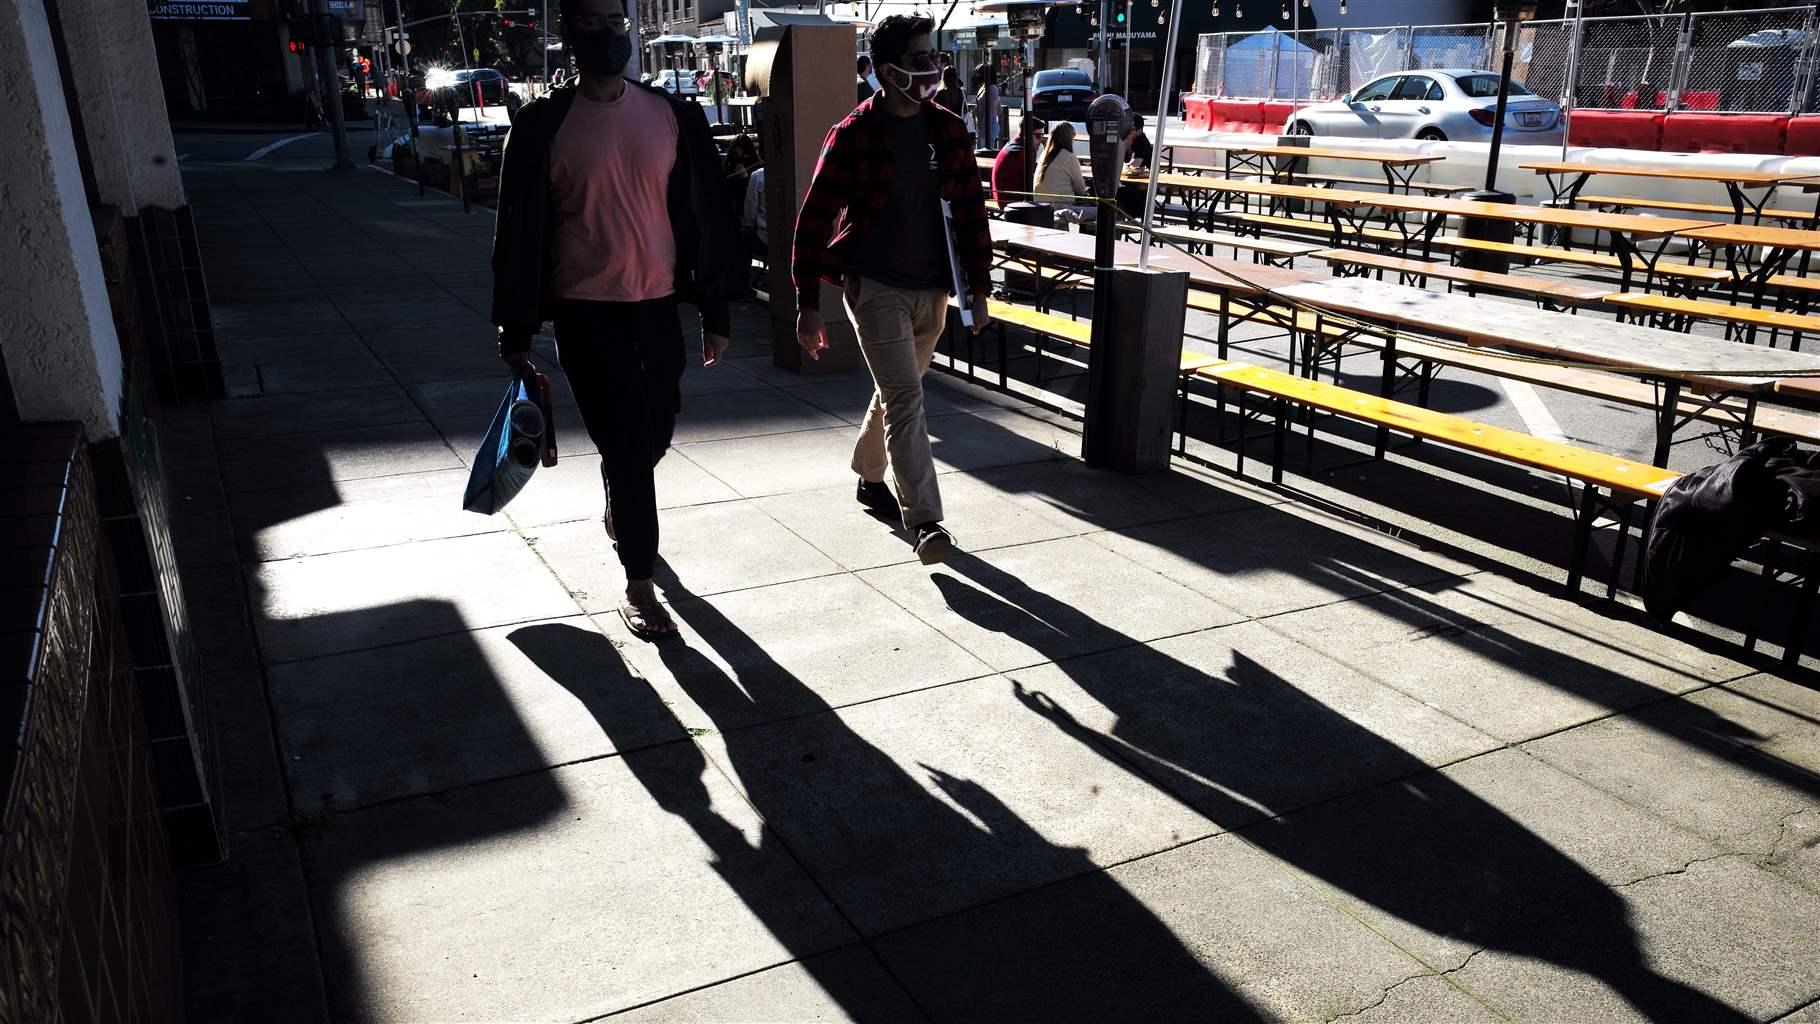 People walk on a business street in San Mateo, California, the United States, Feb. 21, 2021